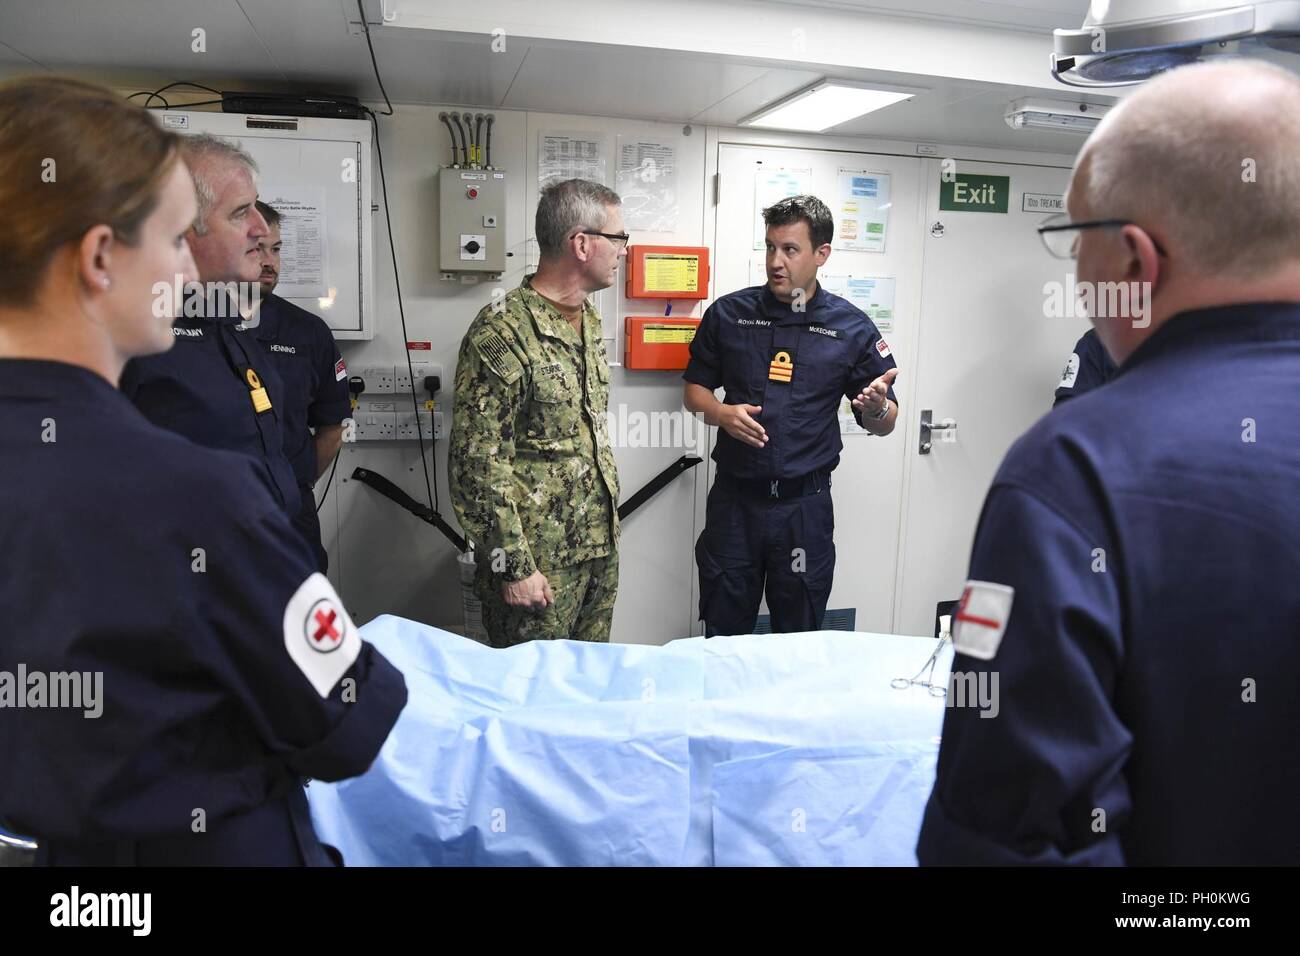 ARABIAN GULF (June 17, 2018) Vice Adm. Scott Stearney, commander of U.S. Naval Forces Central Command, U.S. 5th Fleet, Combined Maritime Forces, center, speaks with members of the Royal Navy aboard Royal Fleet Auxiliary ship Cardigan Bay during Mine Countermeasures Exercise (MCMEX) 18-2. The bilateral exercise enhances cooperation, mutual MCM capabilities and interoperability between the U.S. and U.K., demonstrating the shared commitment of ensuring unfettered operations of naval and support vessels, as well as commercial shipping movements, throughout the maritime domain. Stock Photo